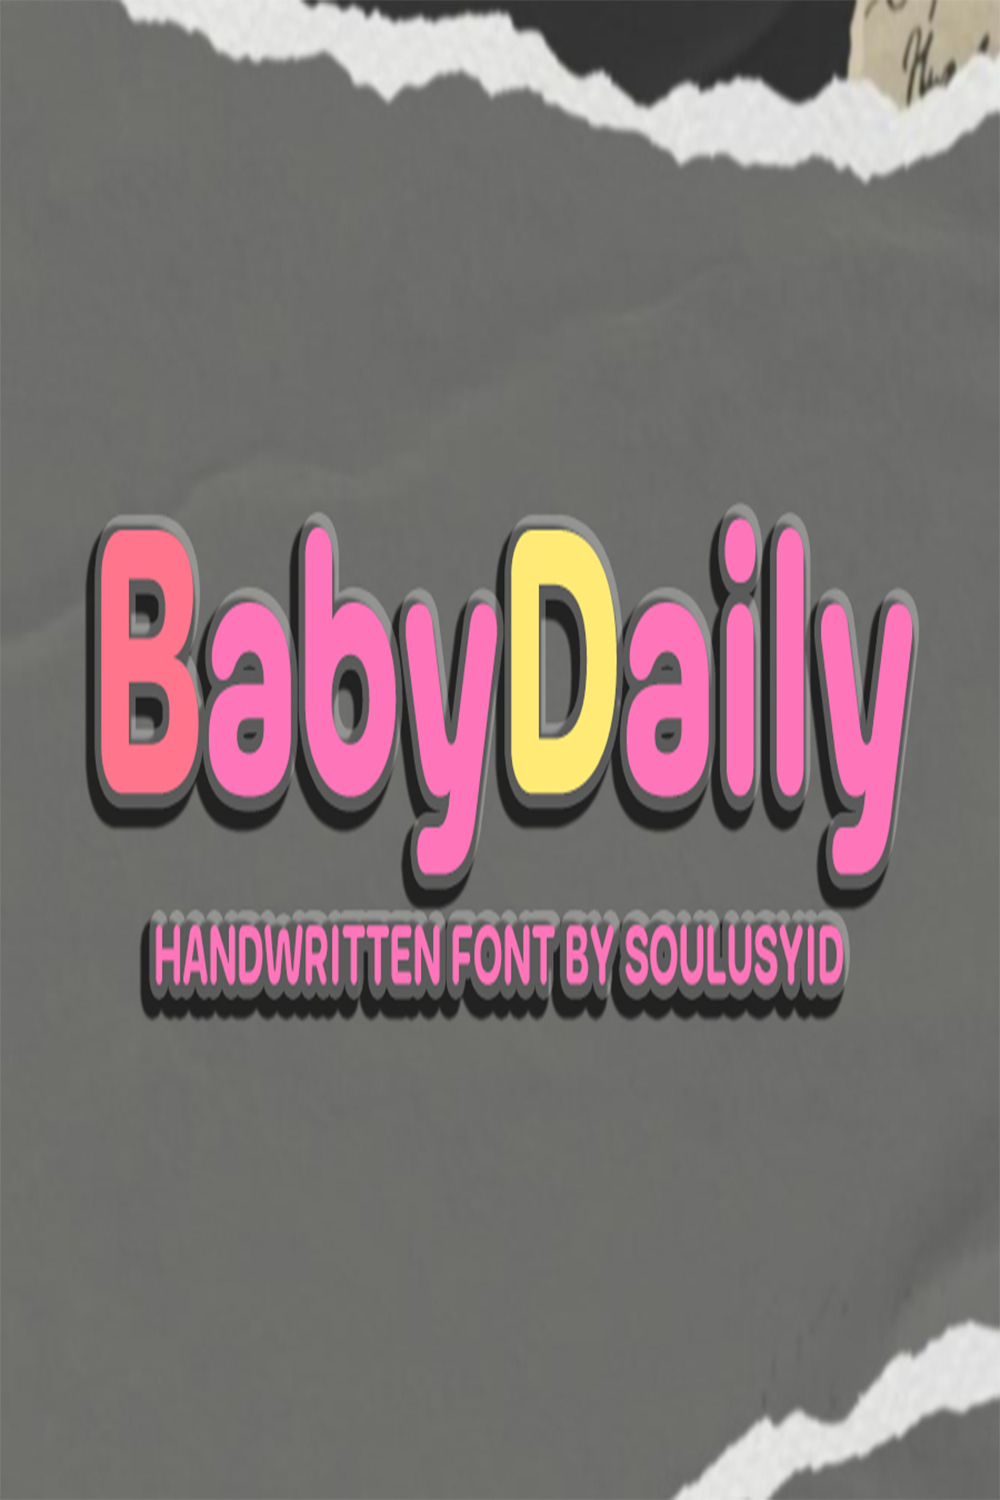 Babydaily pinterest preview image.